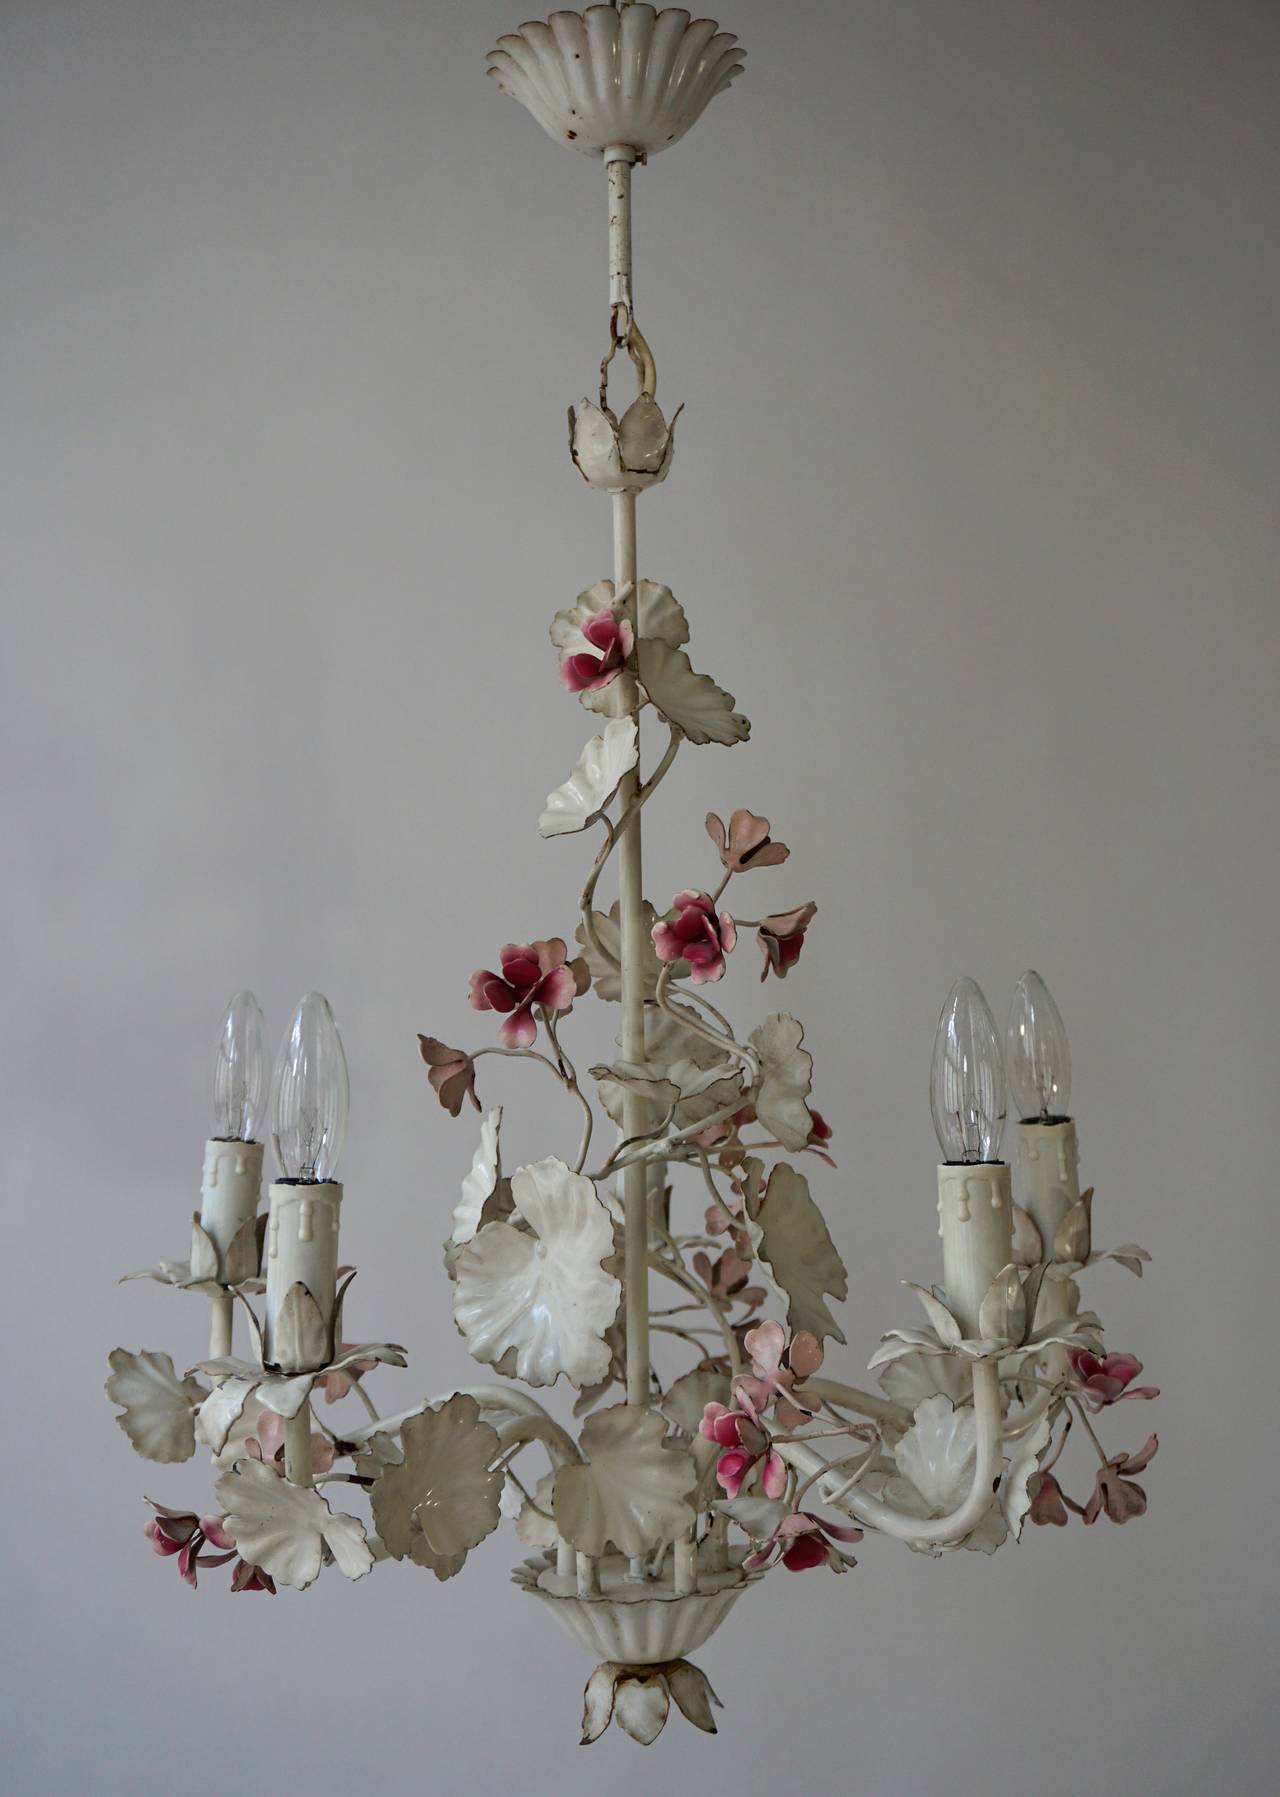 Italian painted metal chandelier with ping flowers and white leaves.
The light requires five single E14 screw fit lightbulbs (60Watt max.) LED compatible.
